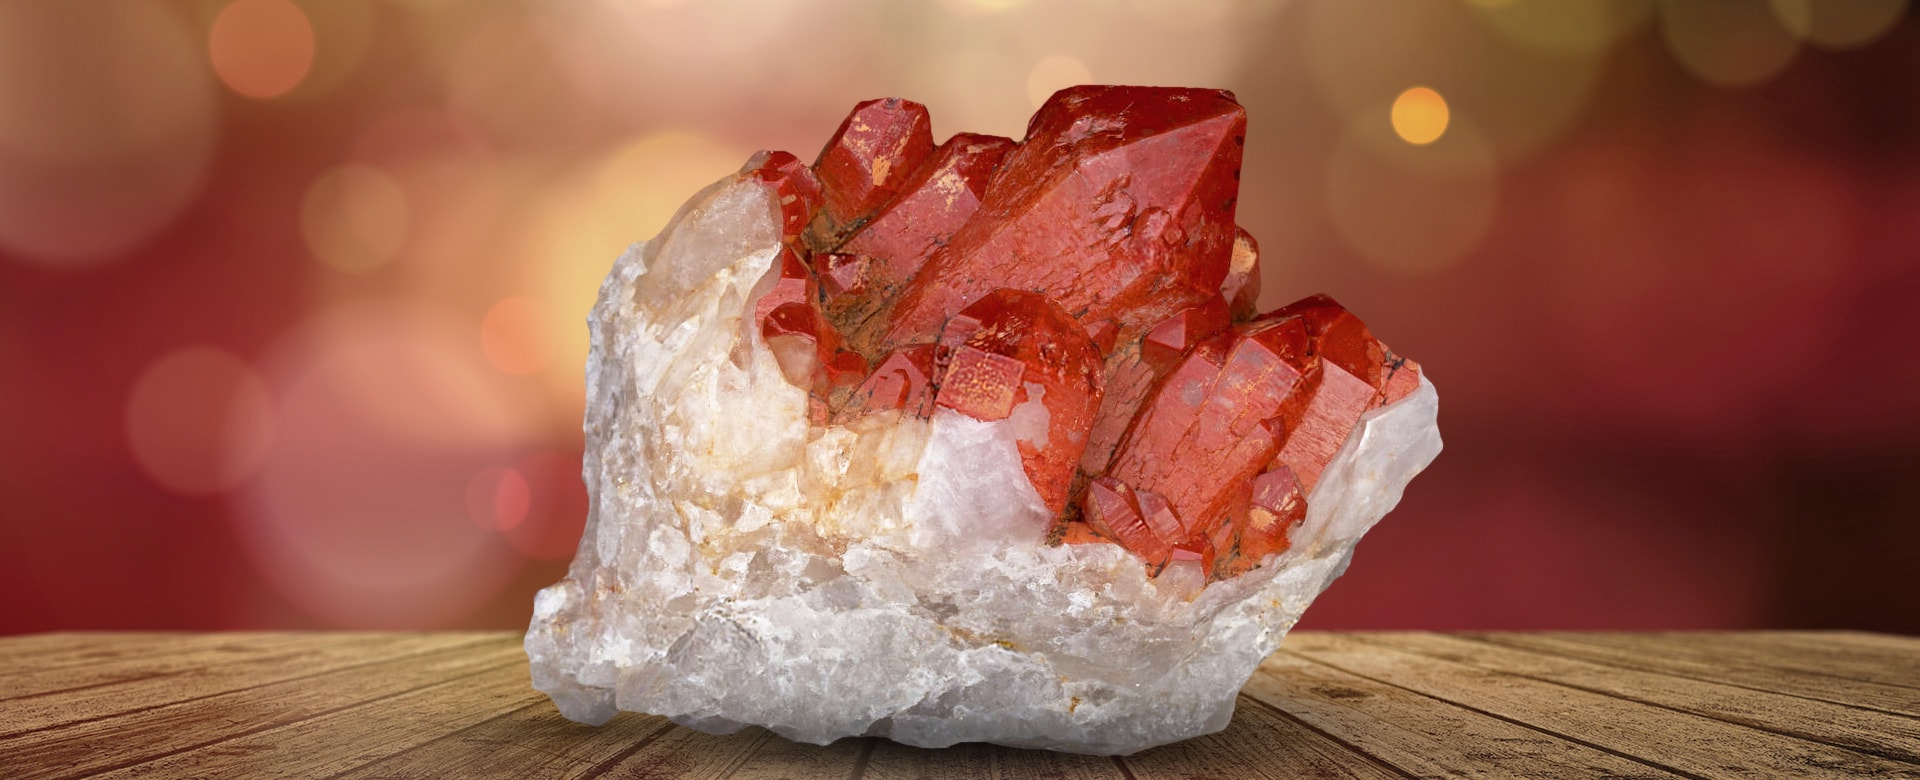 Red Quartz Meaning and Properties 1